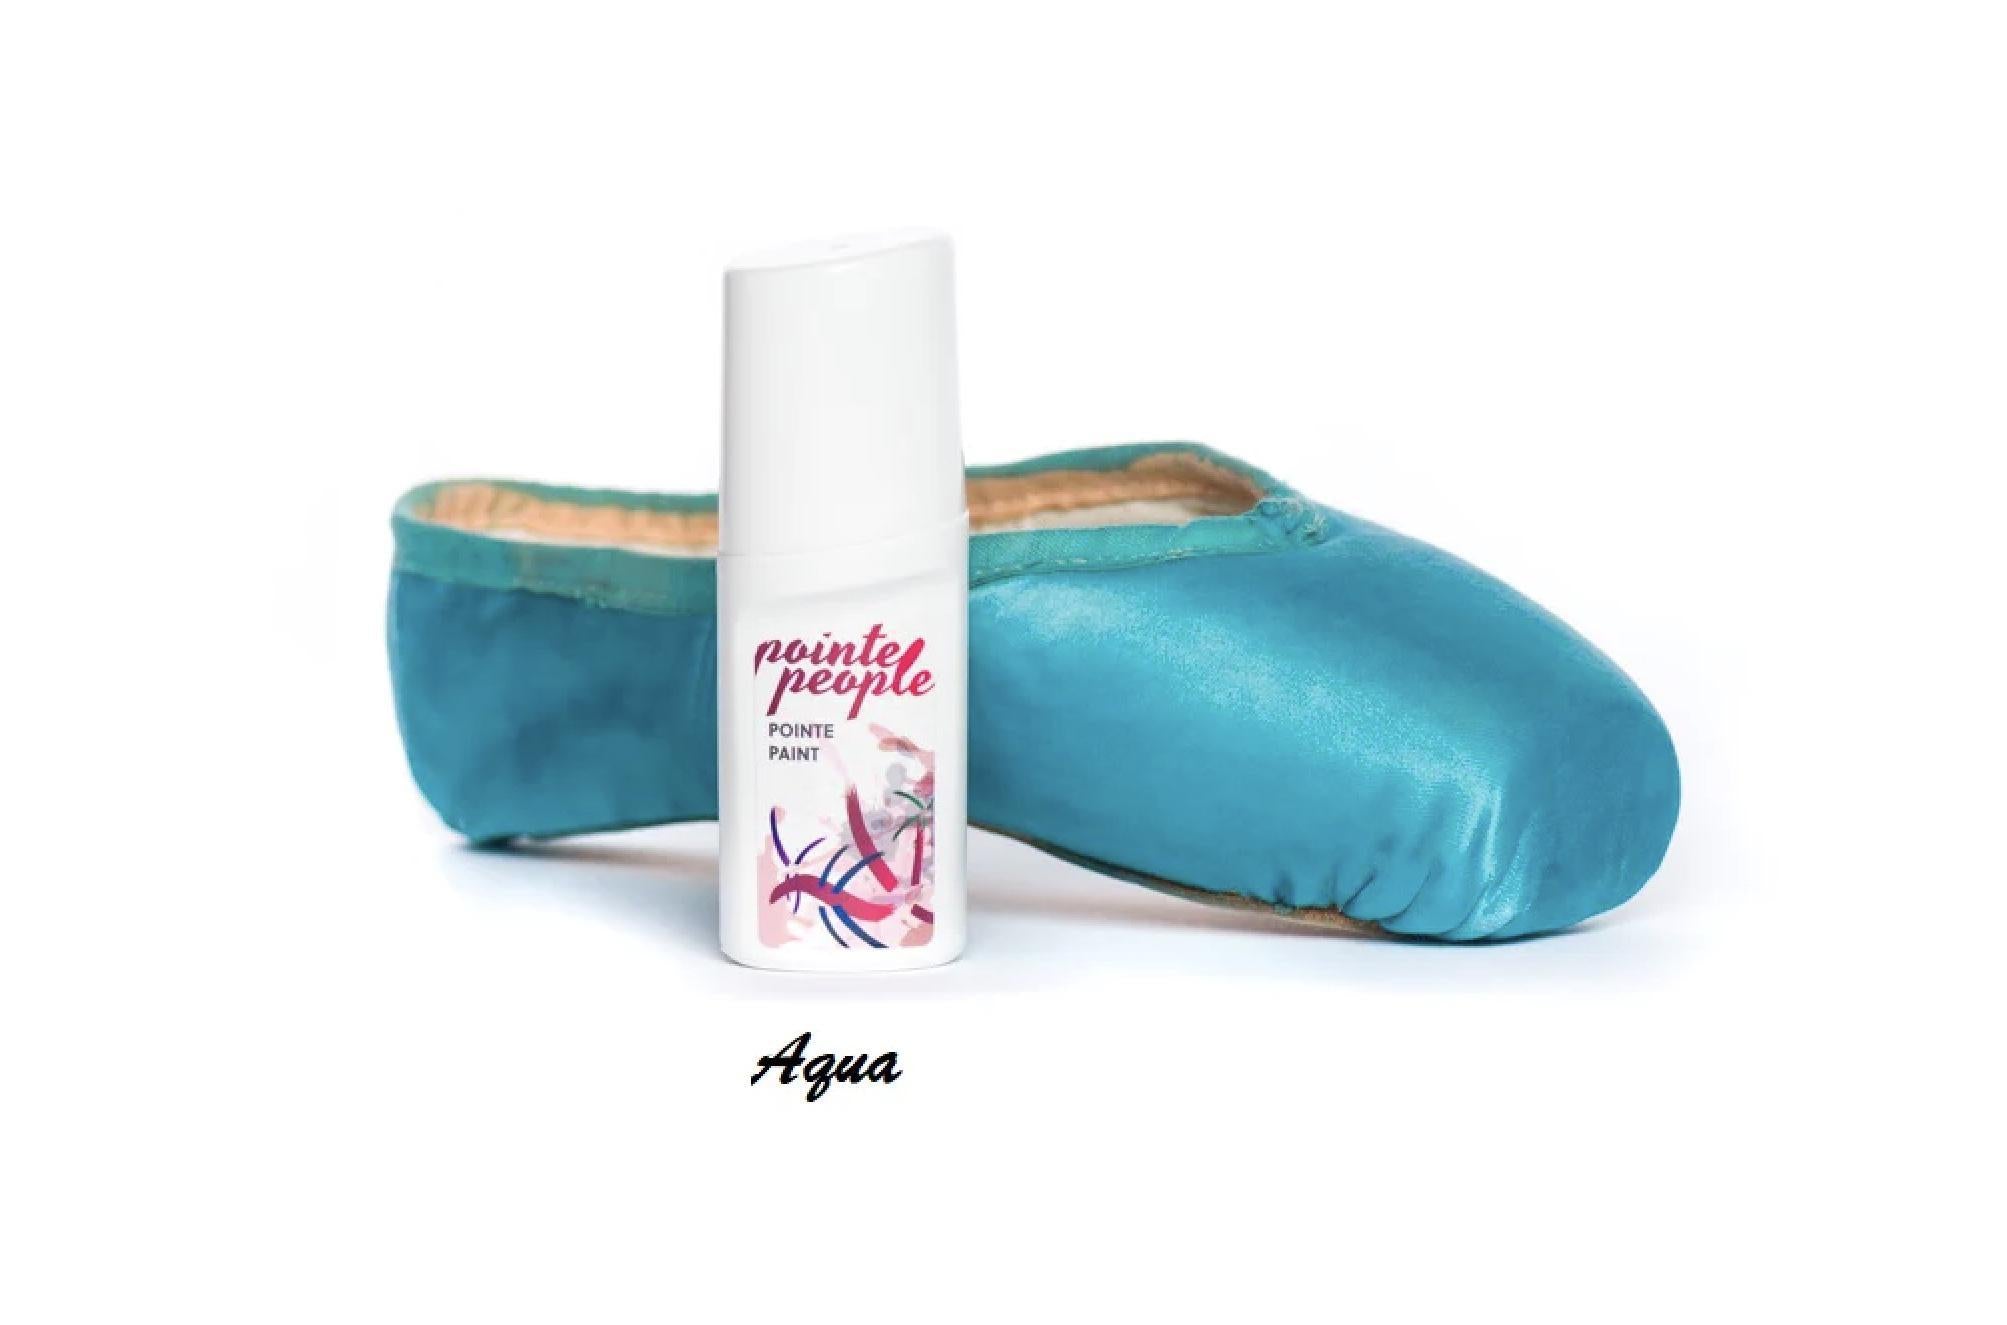 FABRIC POINTE PAINT